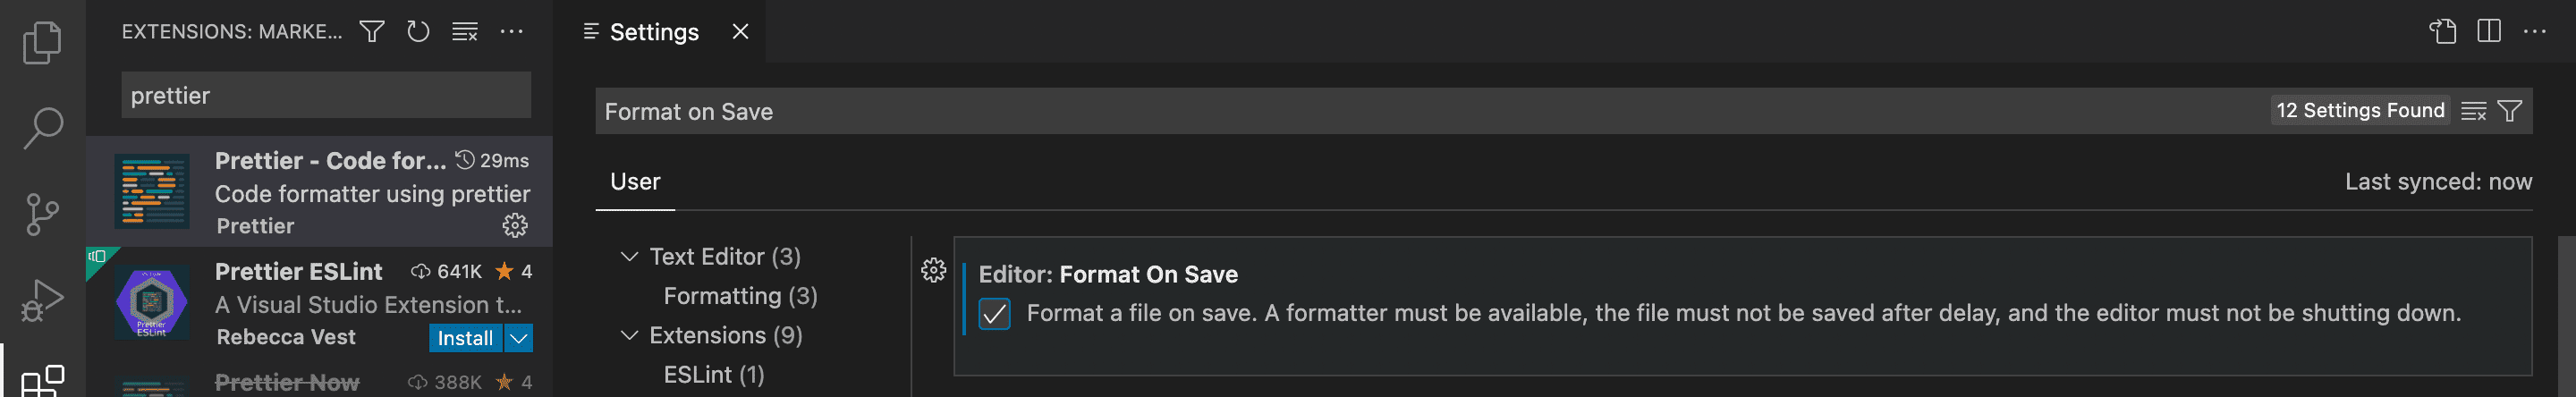 Enable Format on Save